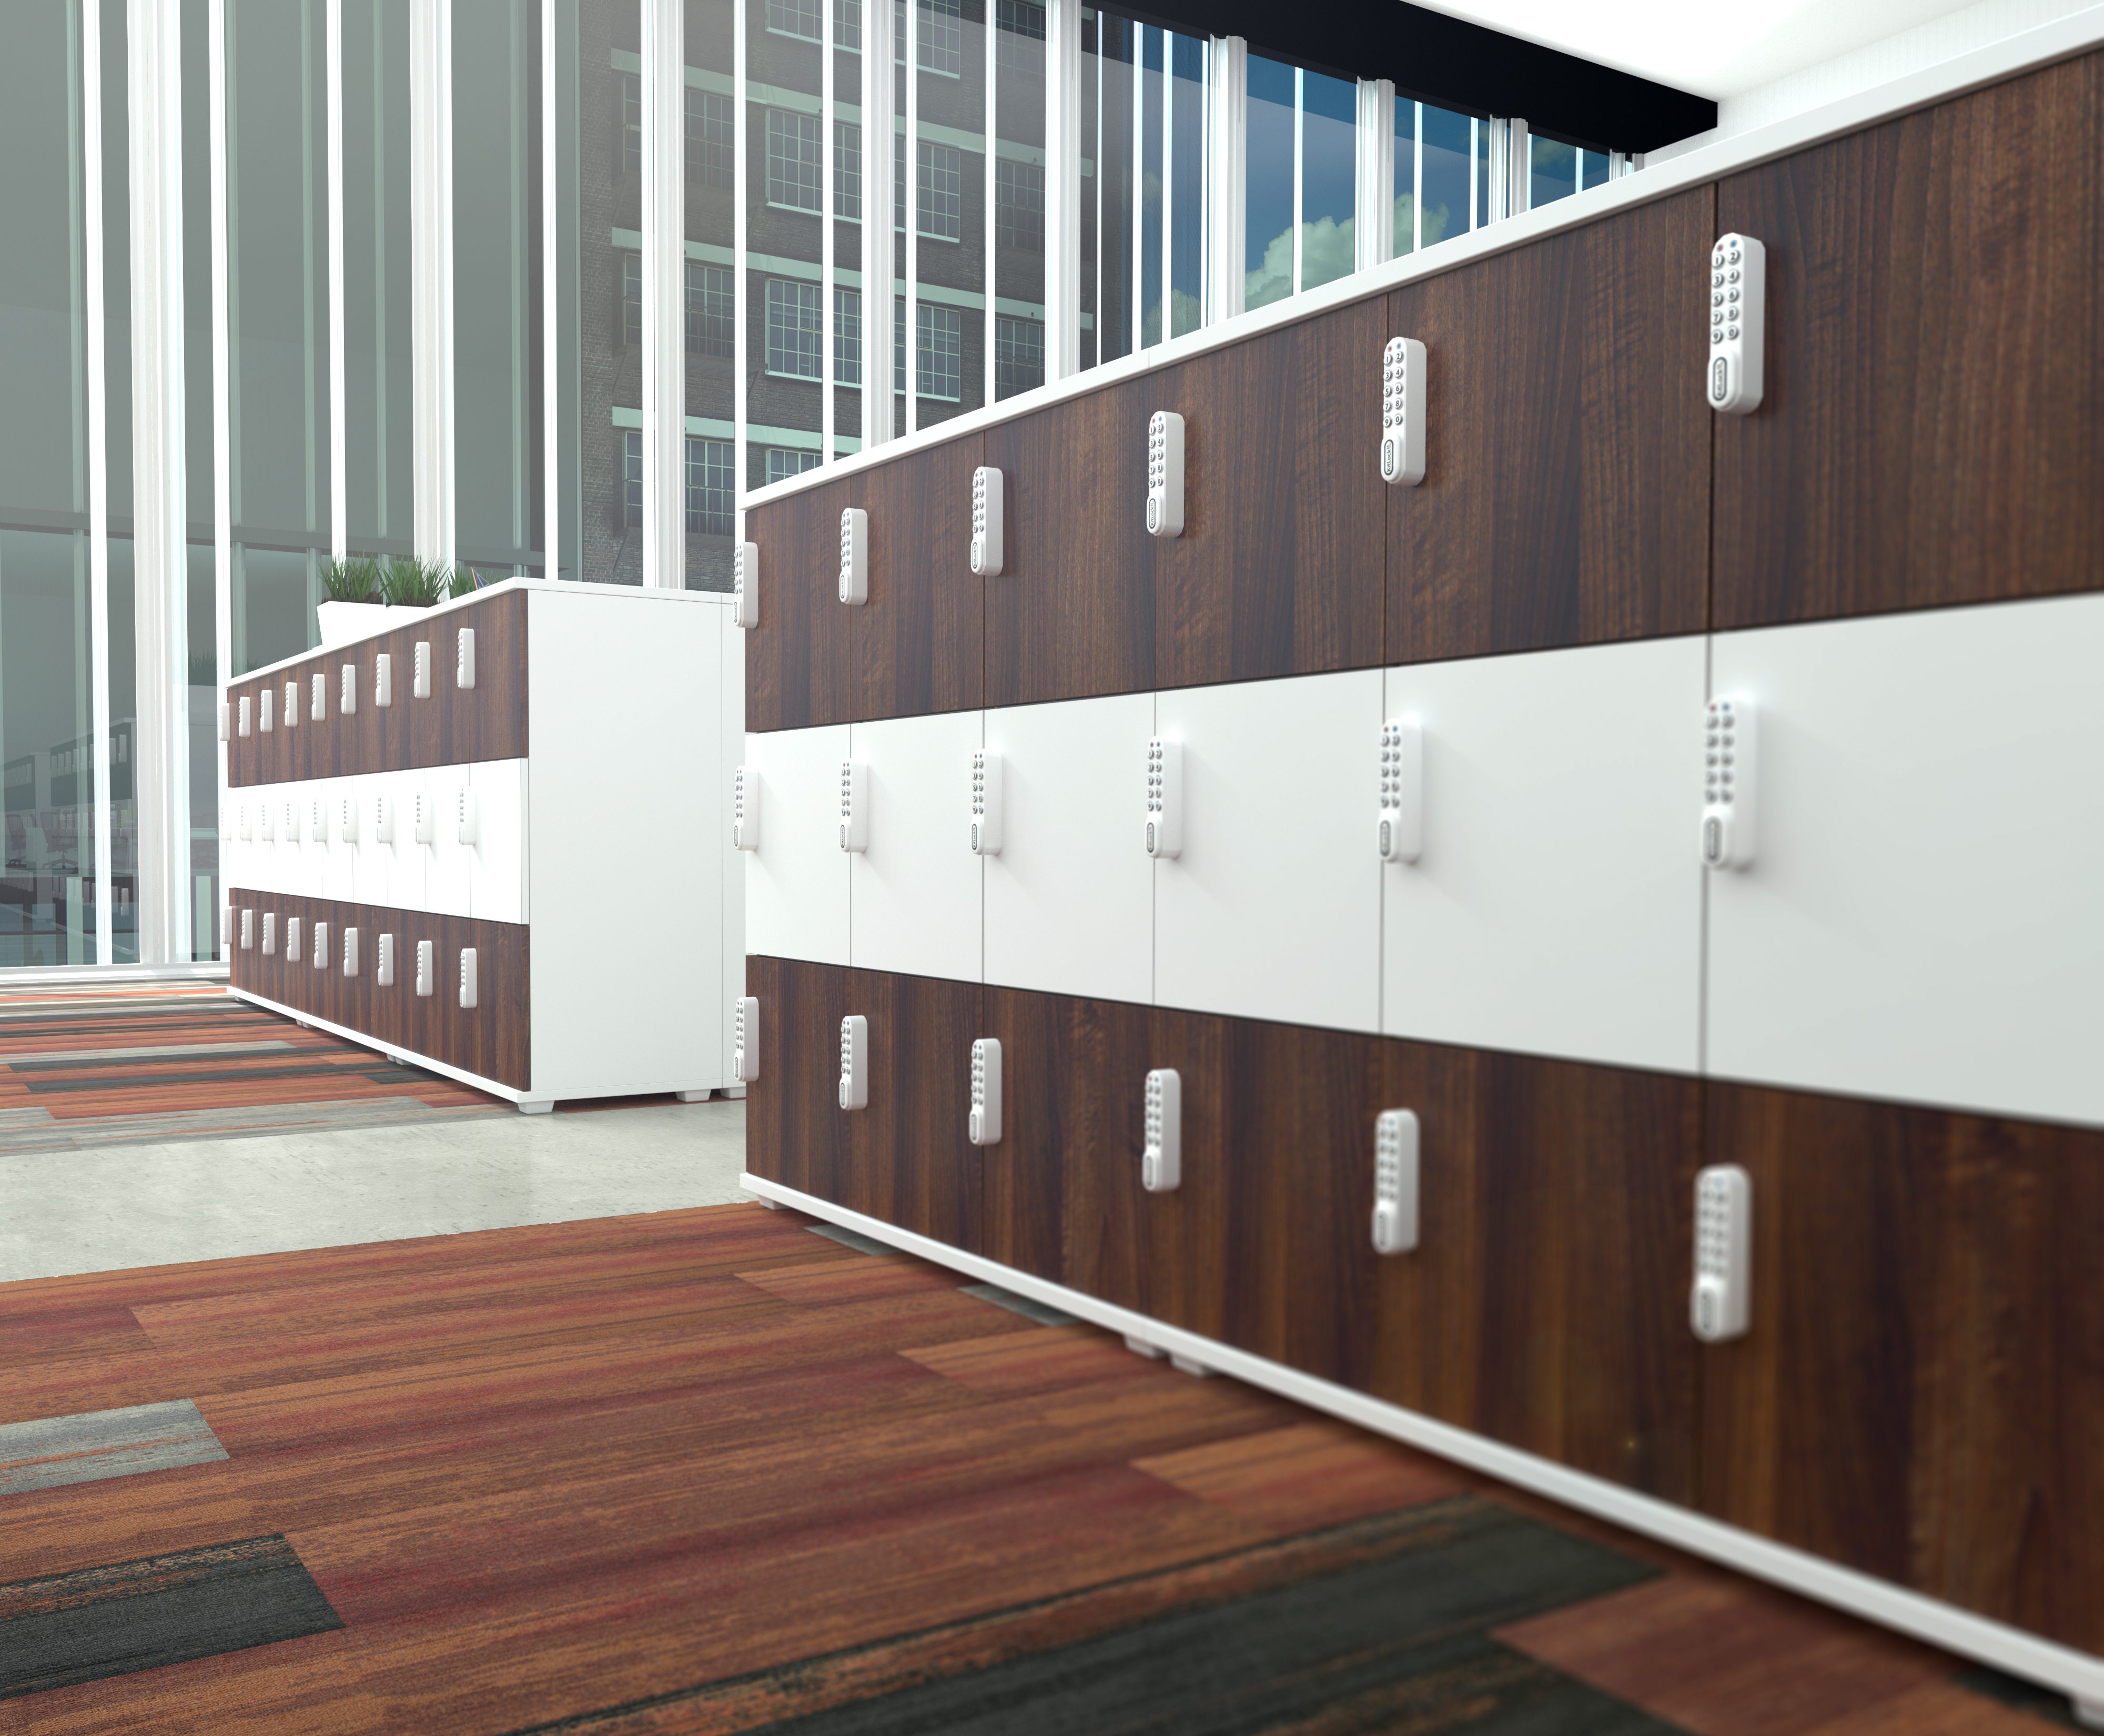 Lockers in an evolving workplace